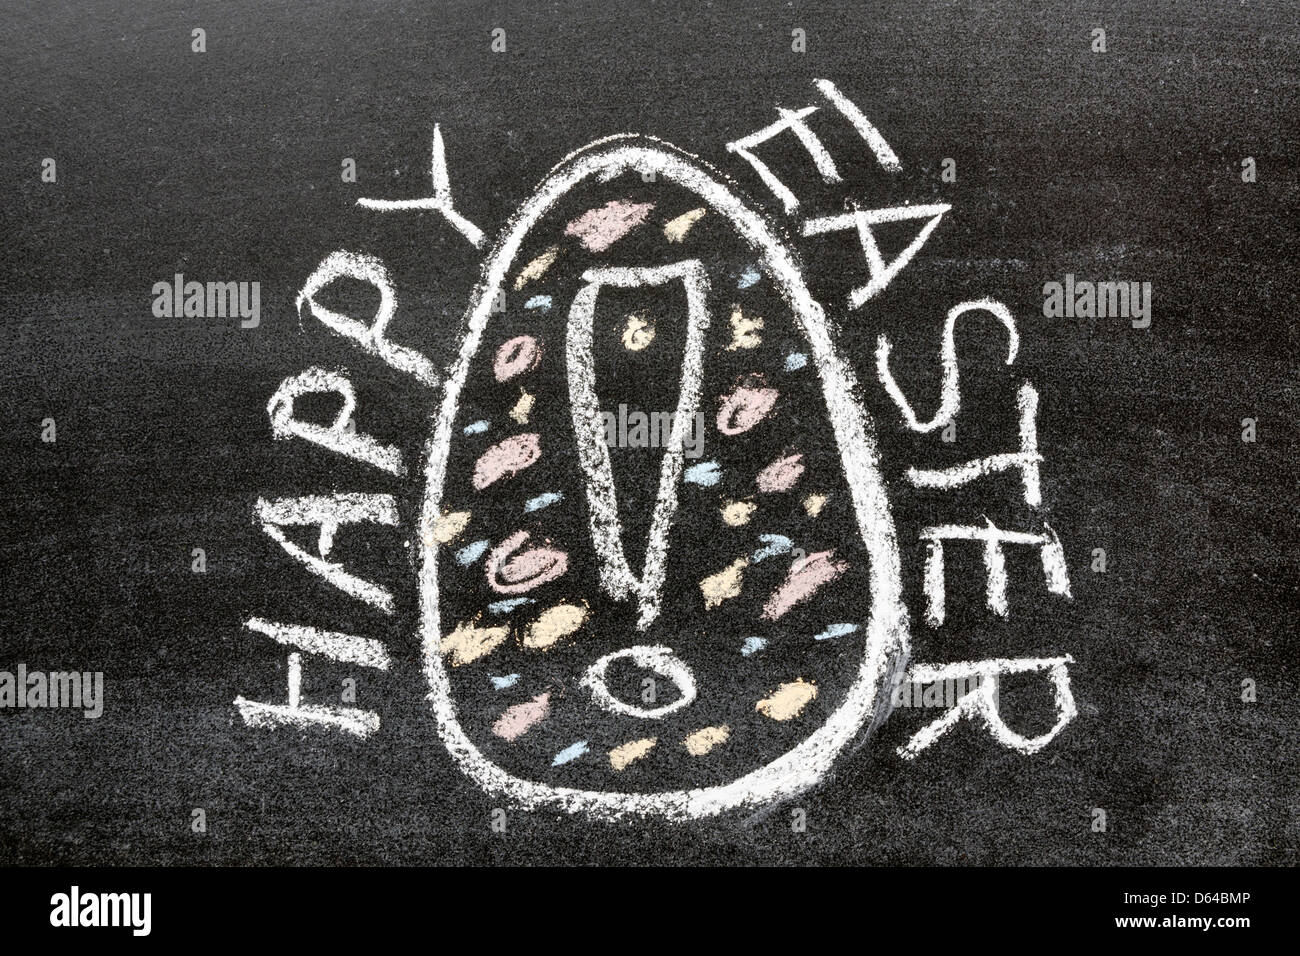 happy easter phrase handwritten on the school blackboard around painted egg picture with exclamation point Stock Photo